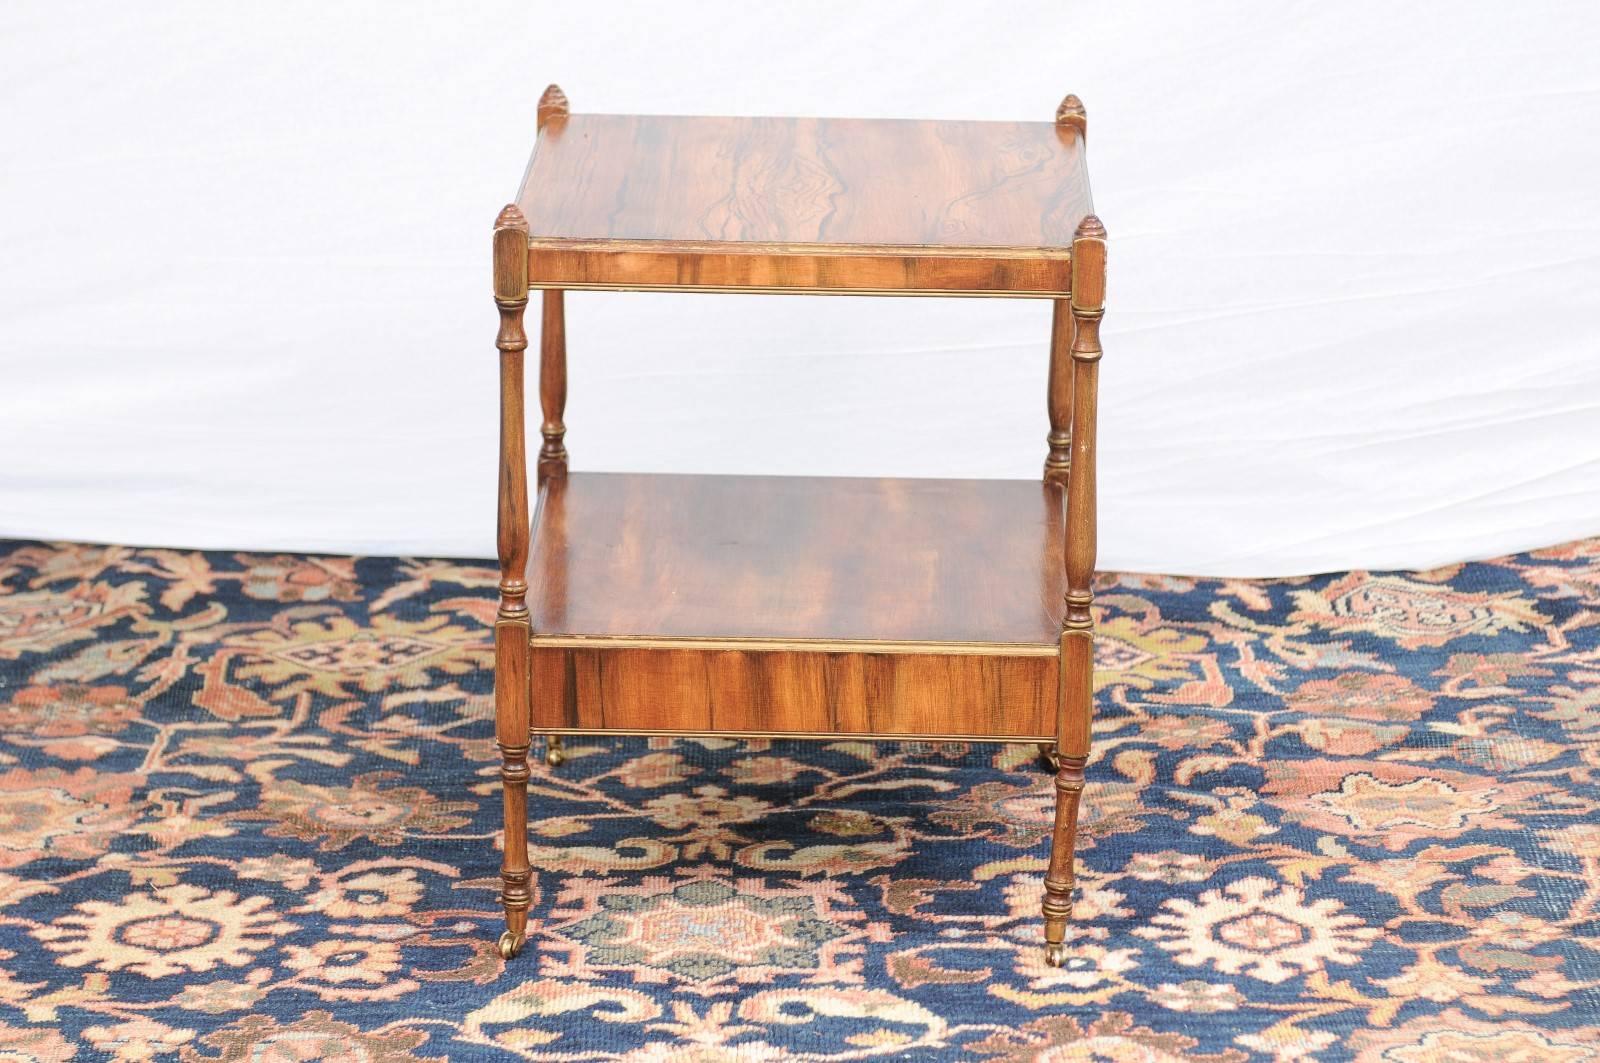 Brass English Two-Tiered Side Table with Faux Bois Finish on Casters, circa 1920